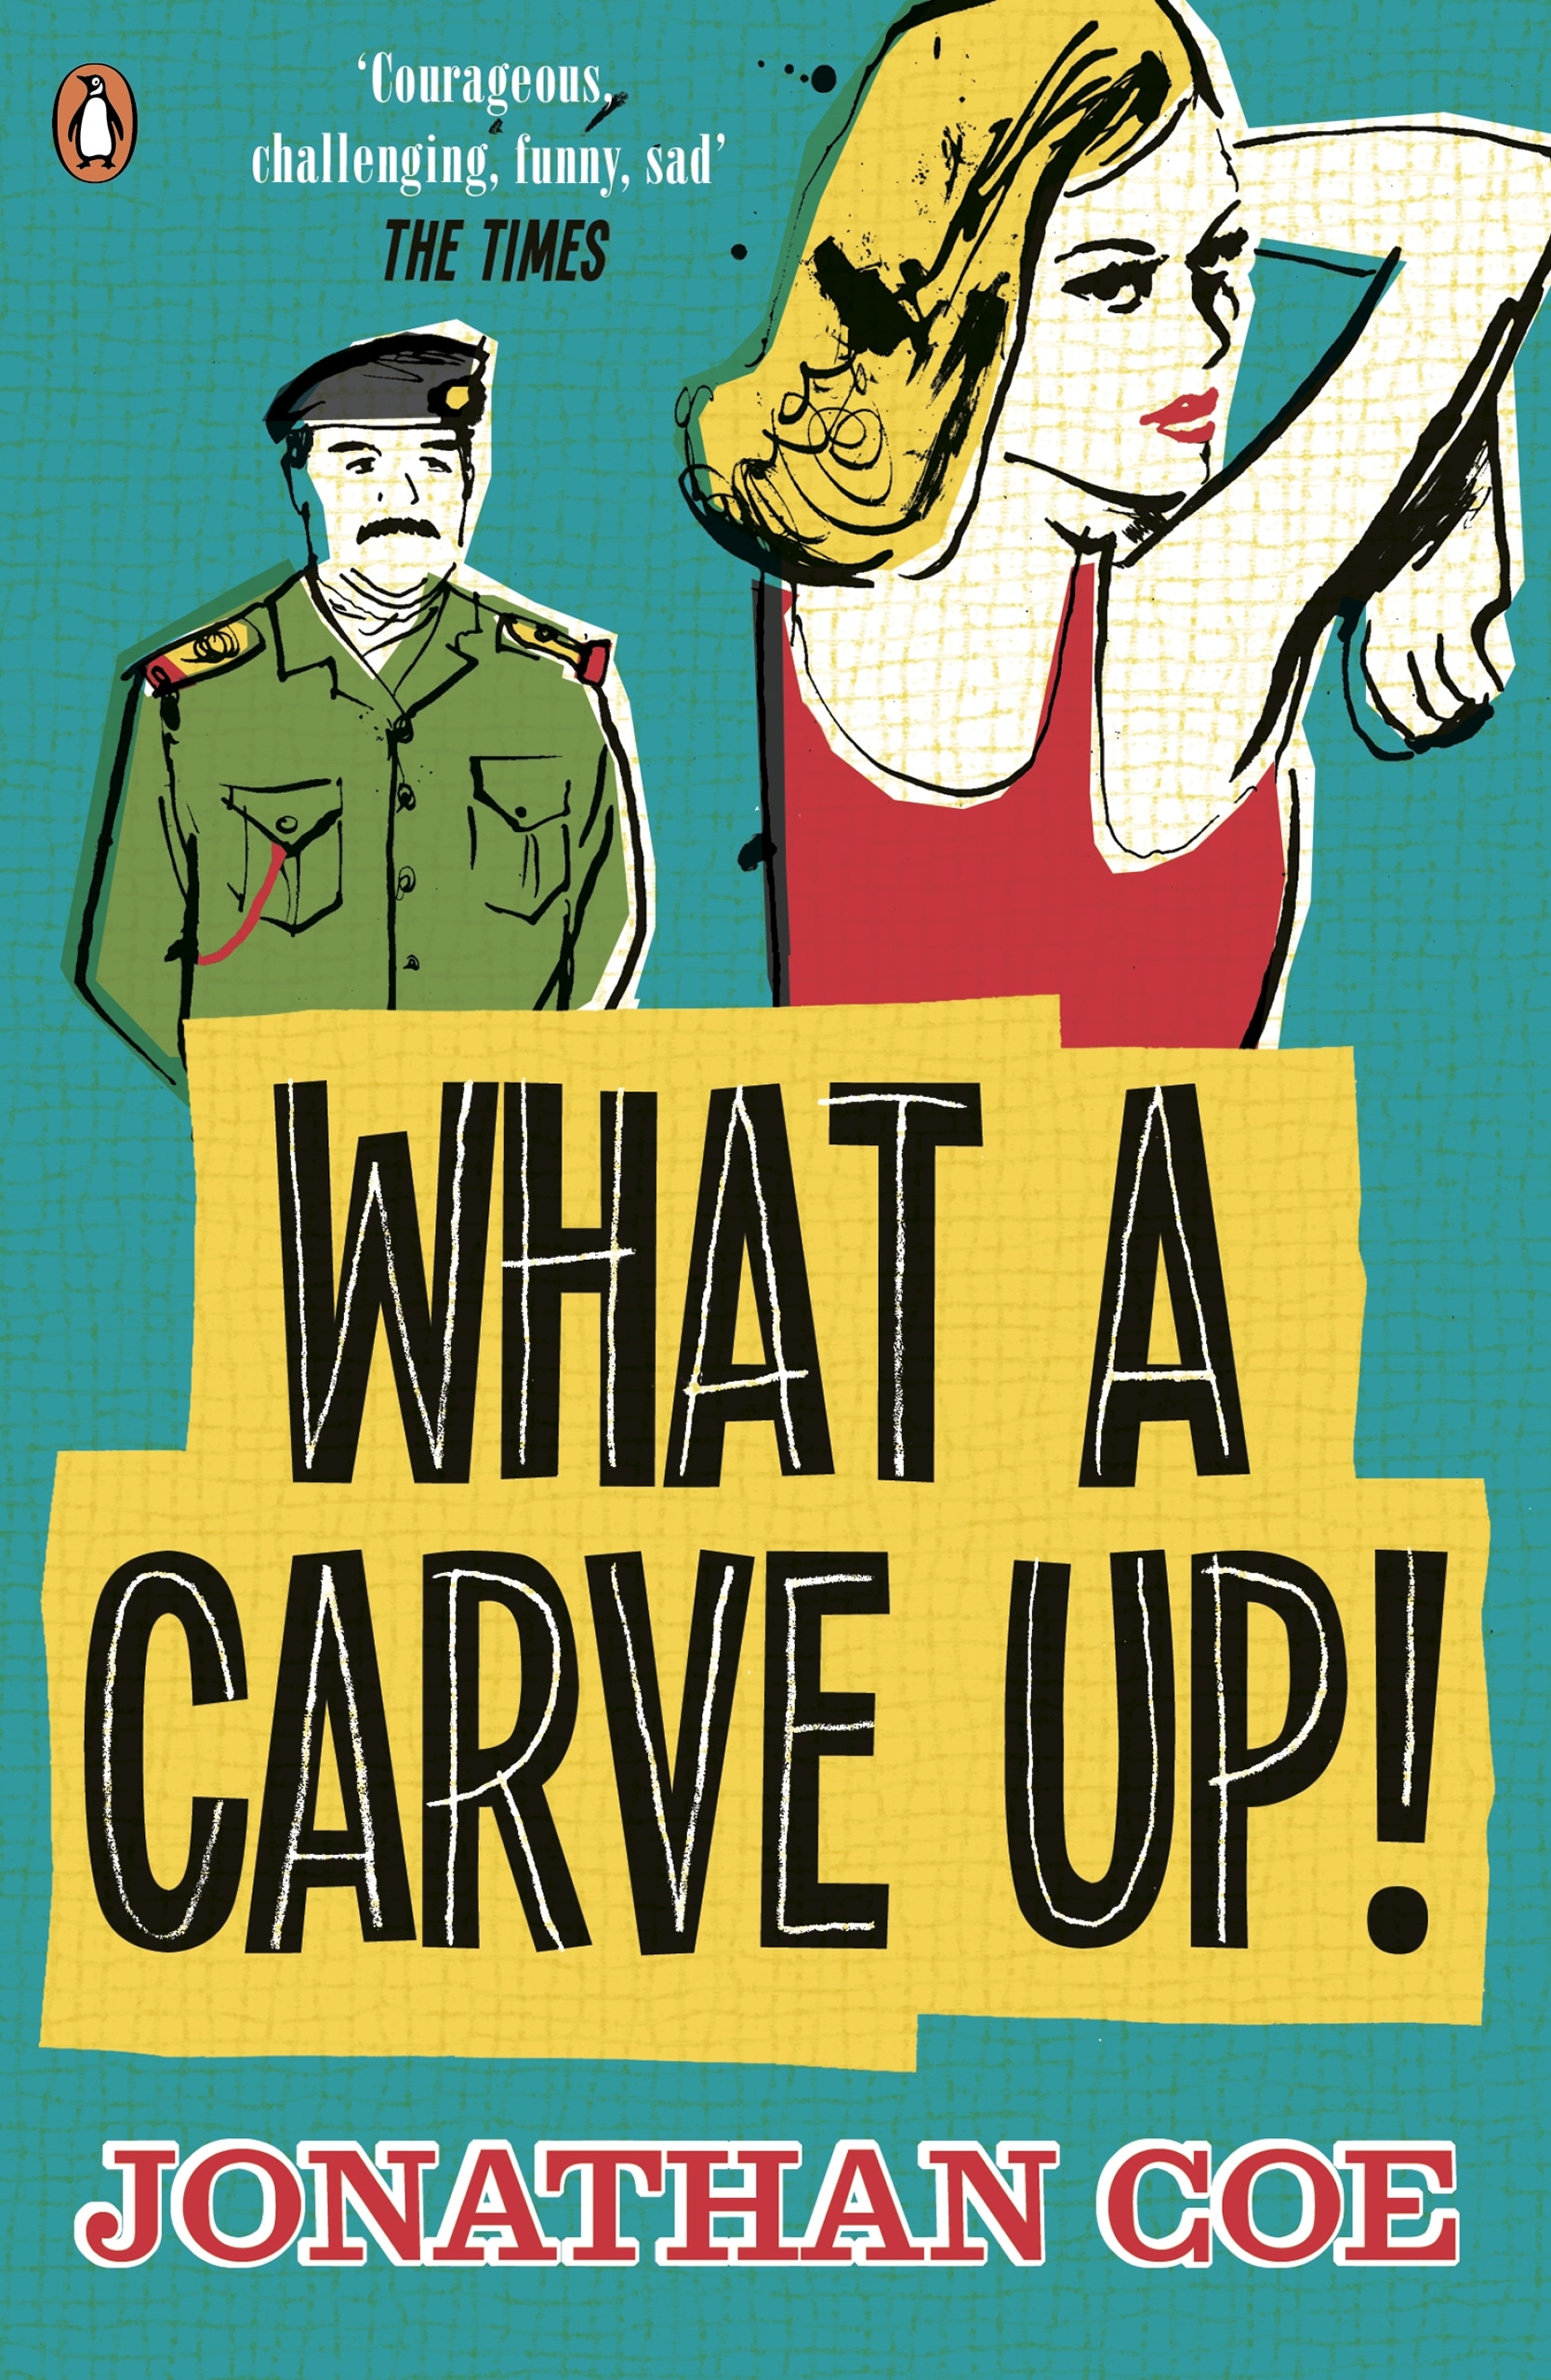 Book “What a Carve Up!” by Jonathan Coe — June 26, 2014